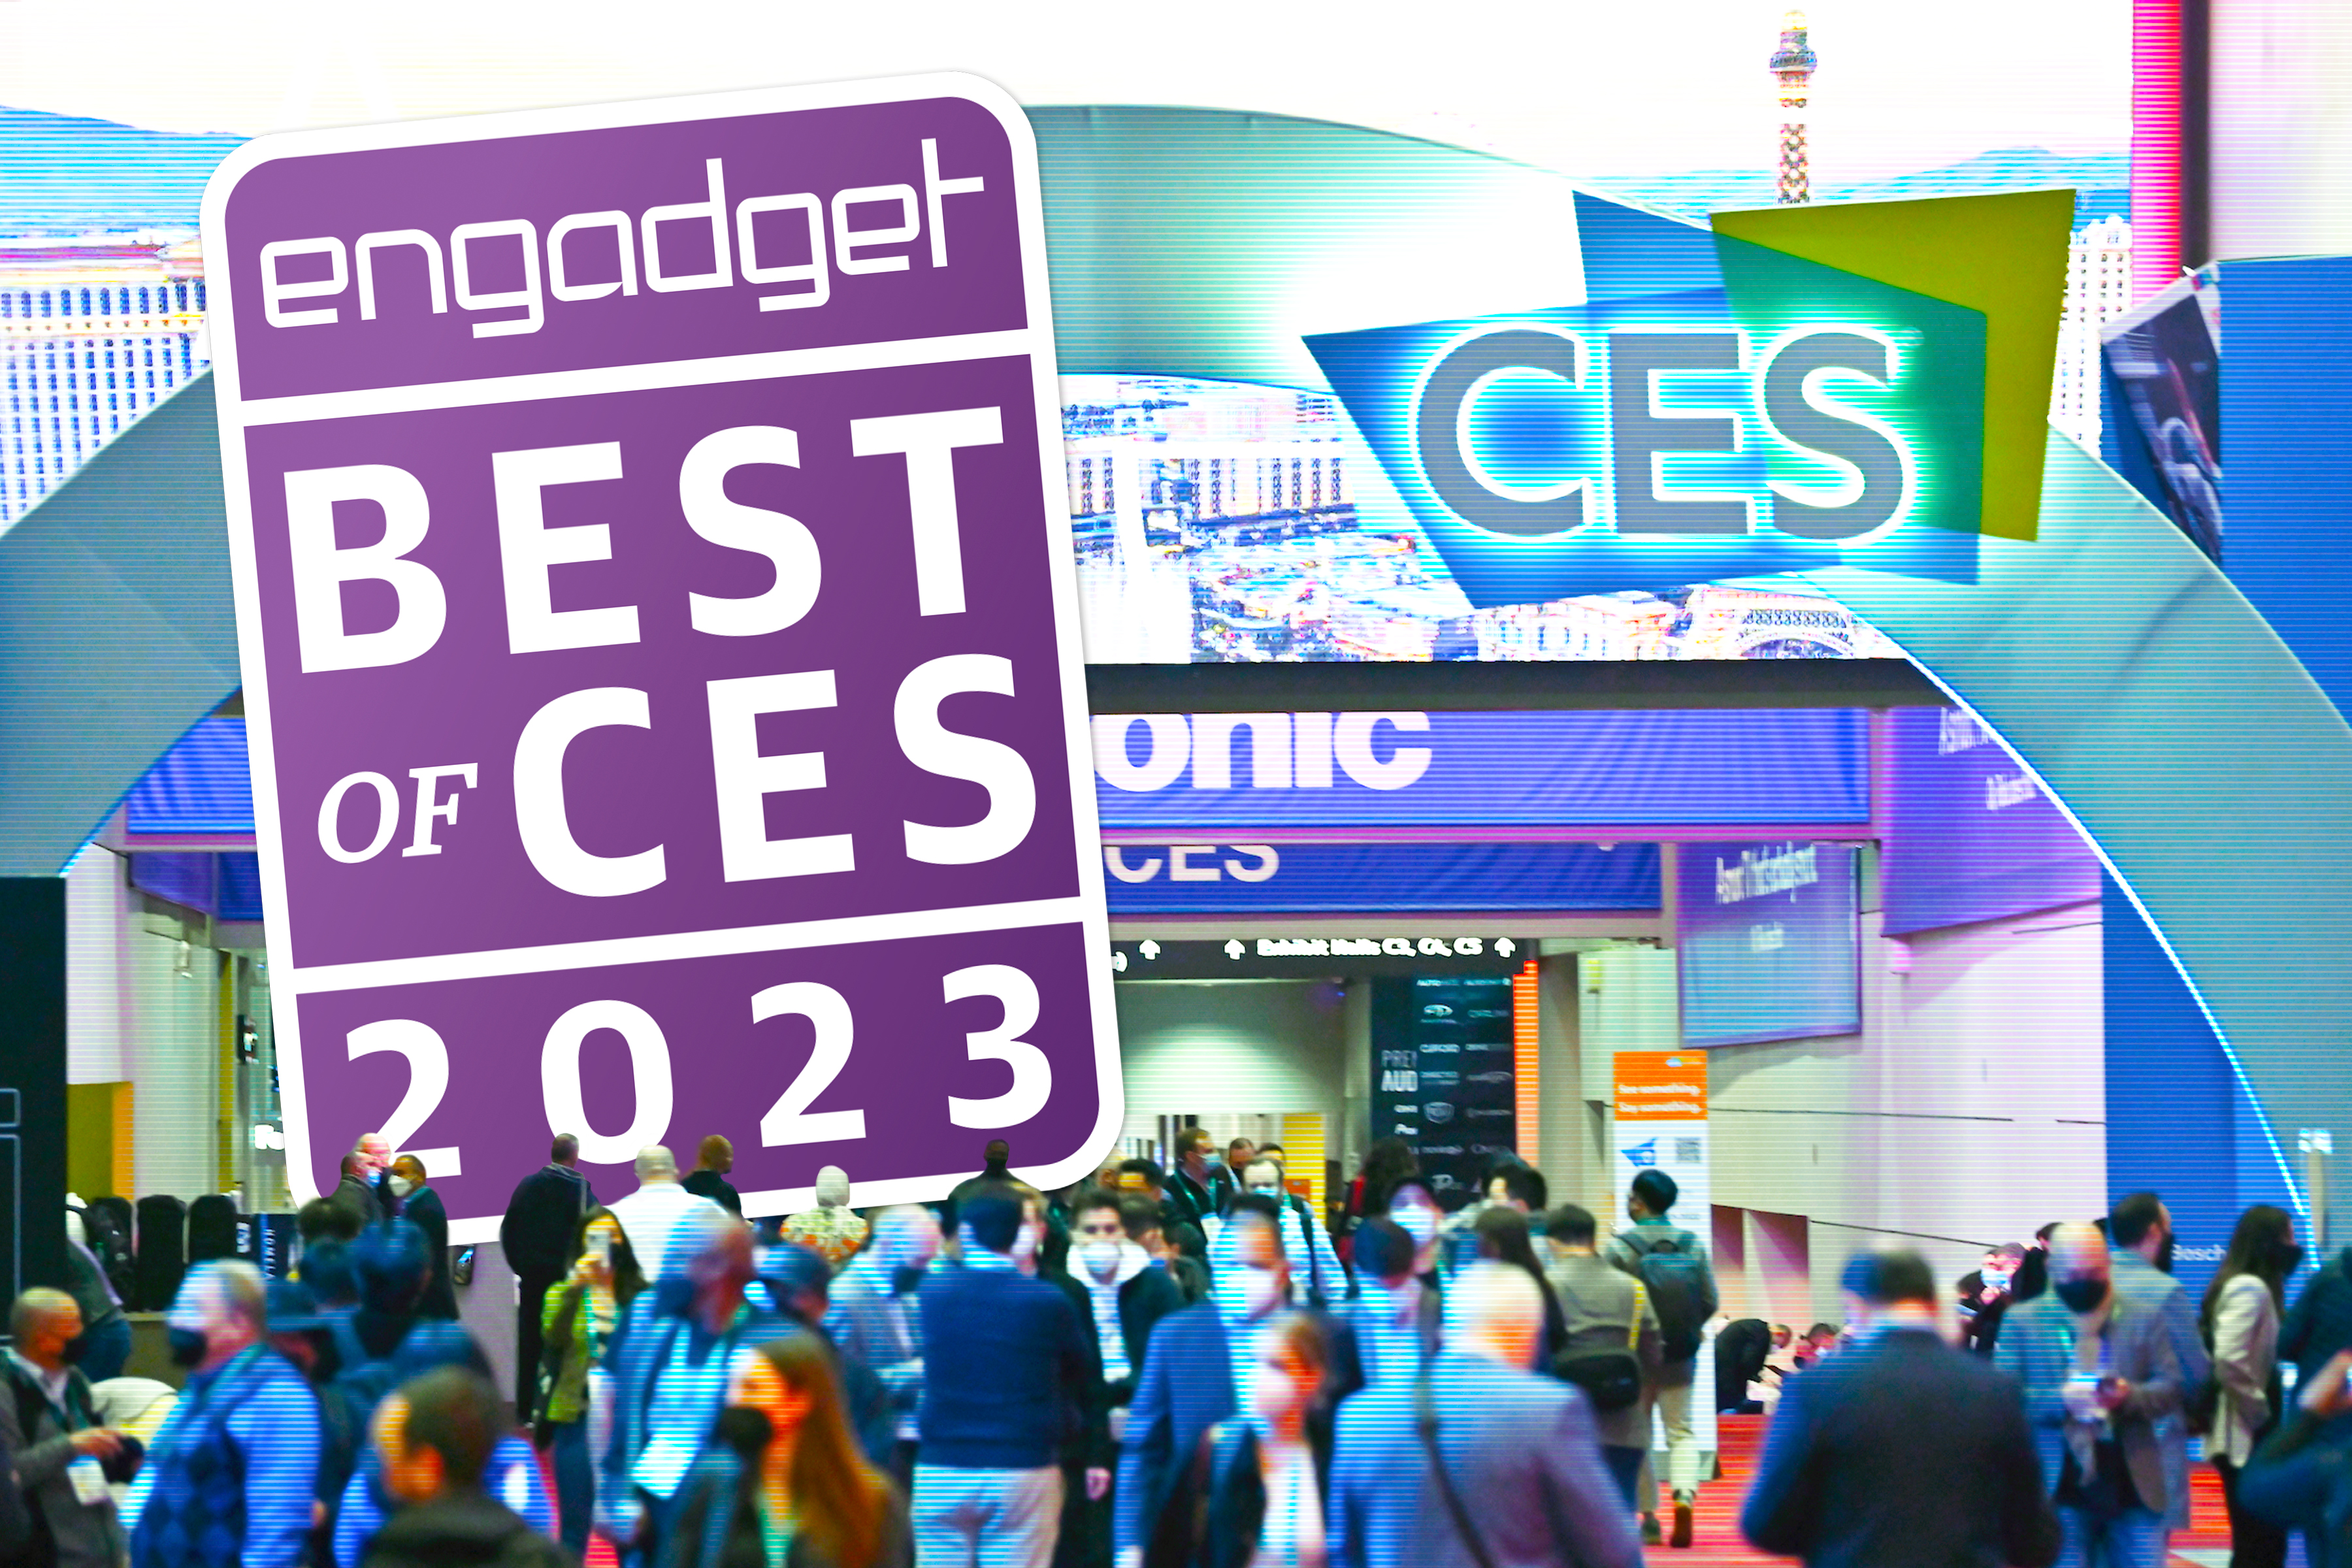 The best of CES 2023